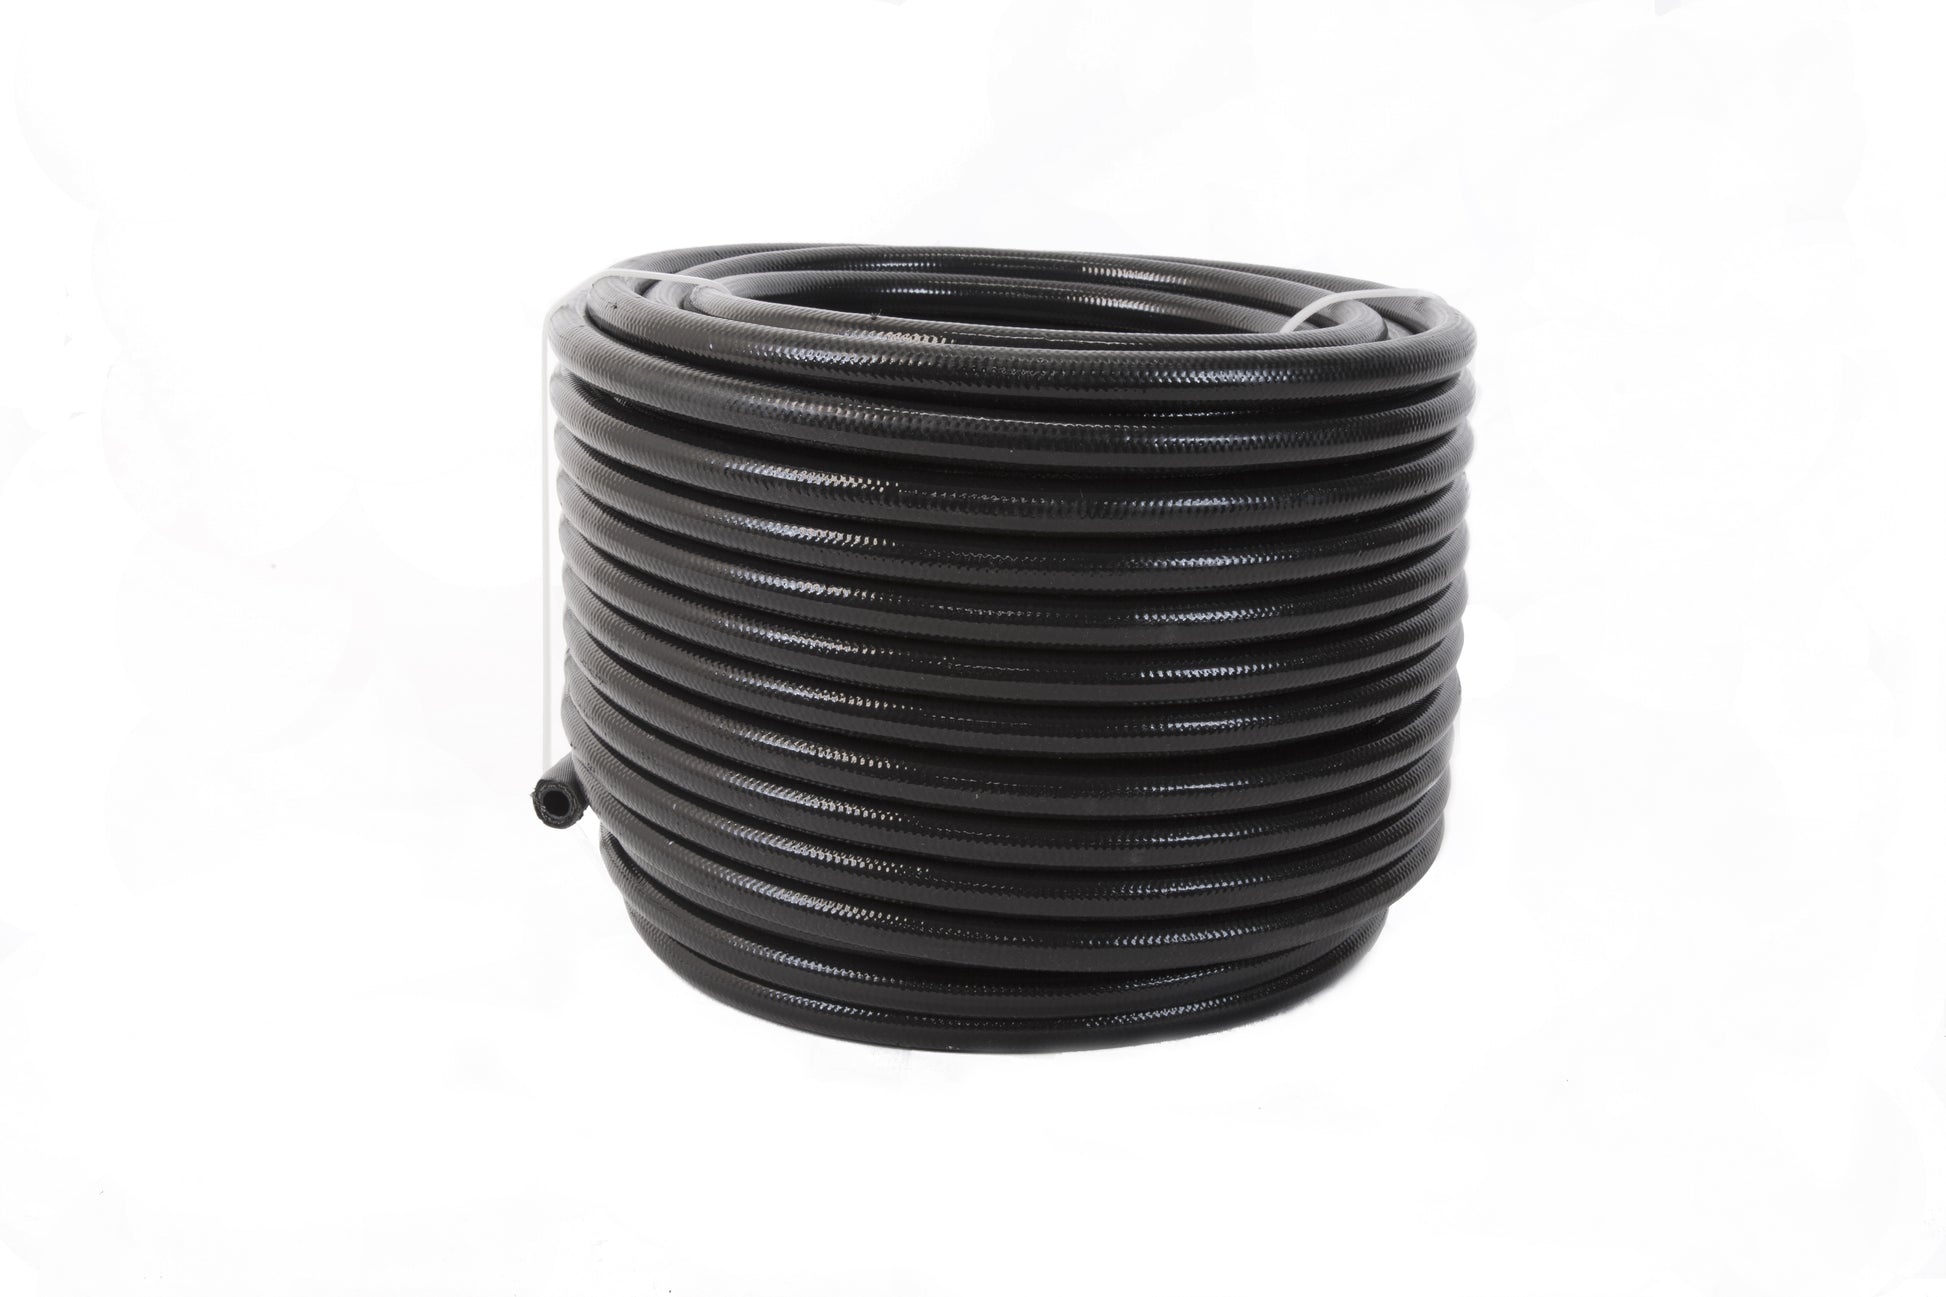 Aeromotive 15326 - PTFE SS Braided Fuel Hose - Black Jacketed - AN-08 x 12ft